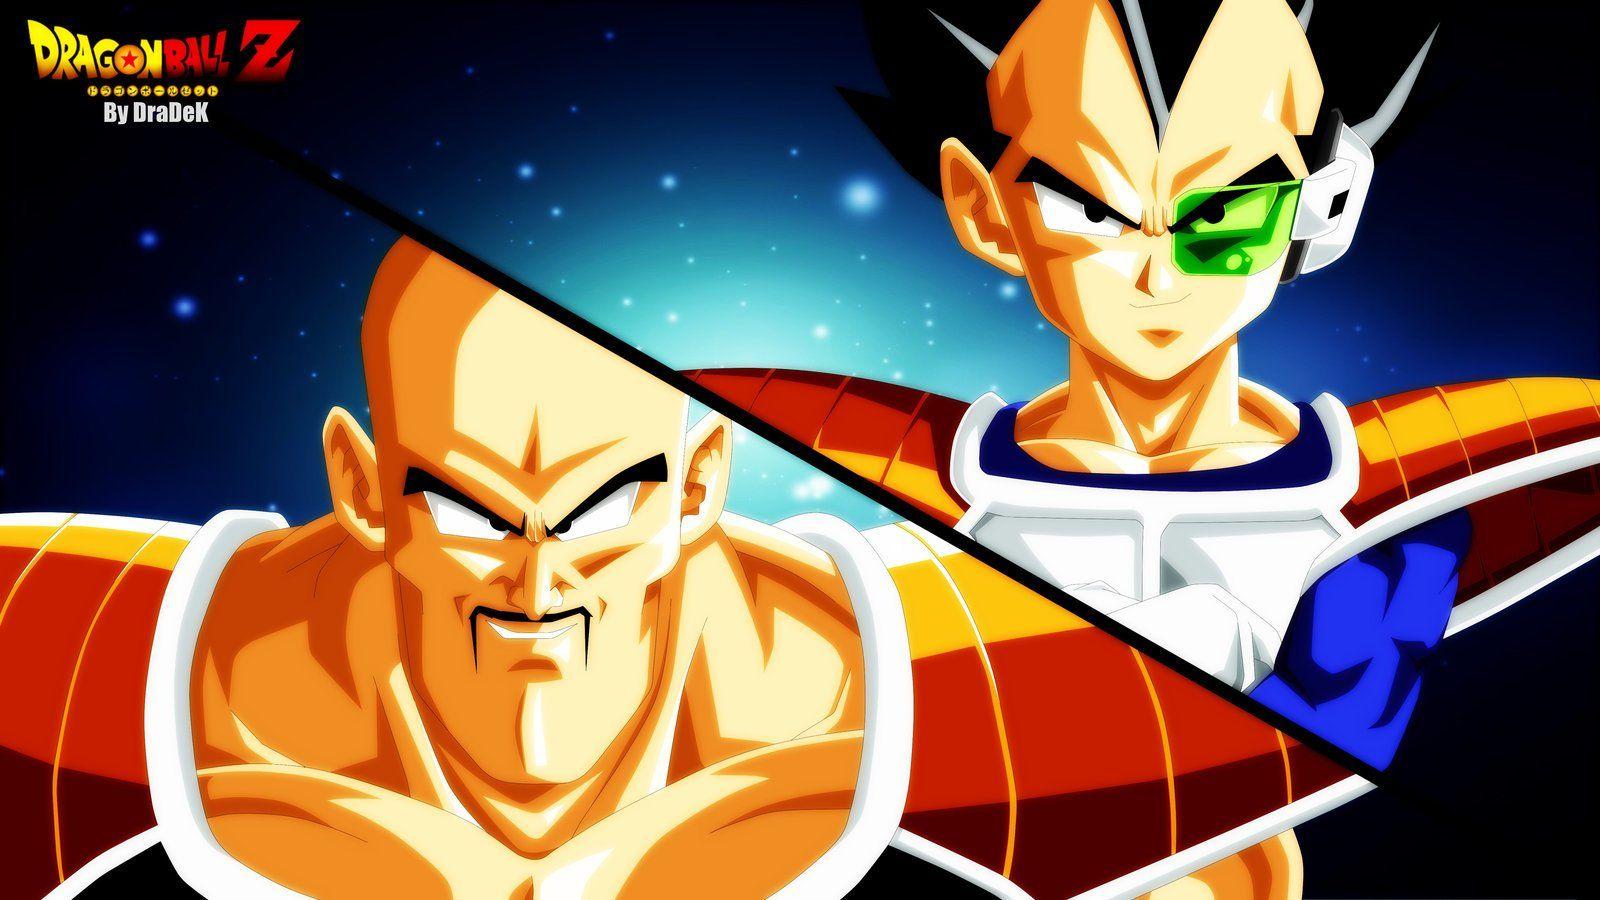 Nappa and Vegeta Wallpaper and Background Imagex900